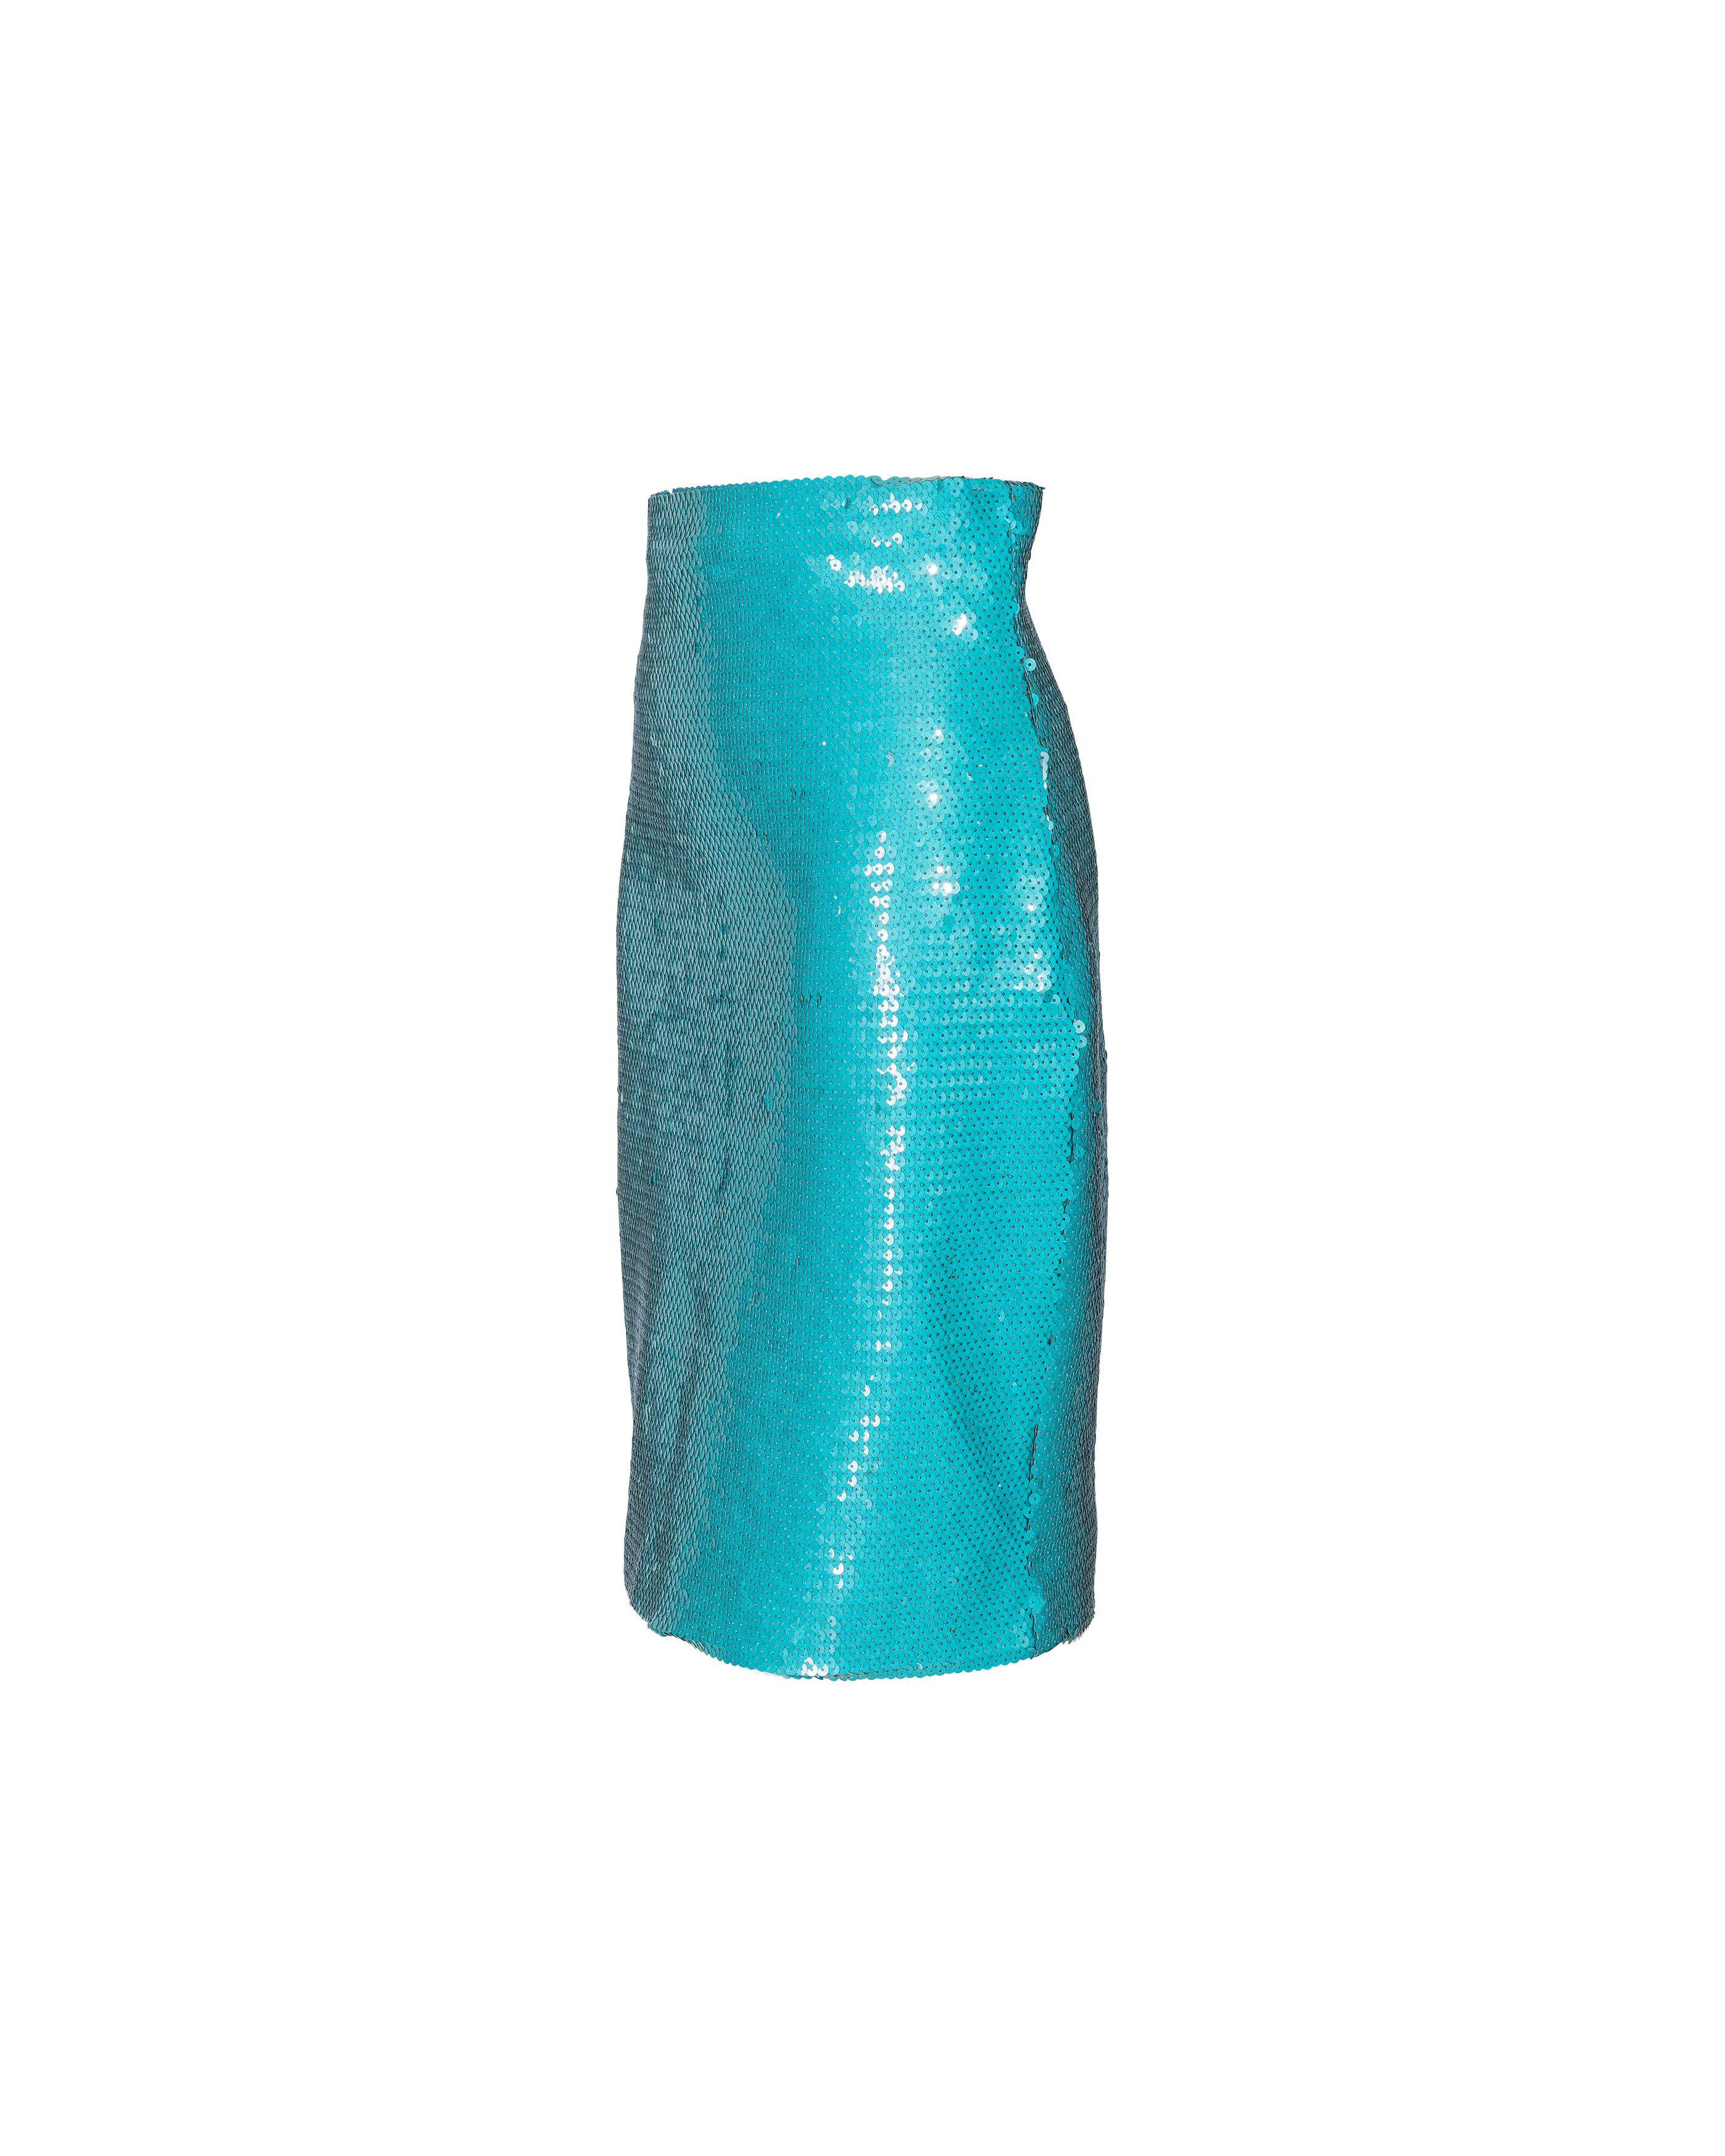 1980's Stephen Sprouse turquoise fully sequined skirt. Concealed back zip closure and small center back slit. Boning at sides and wide hip creates subtle 'mod' silhouette. Fabric Contents: 84% Polyester, 16% Lycra. Fully lined with black lining.